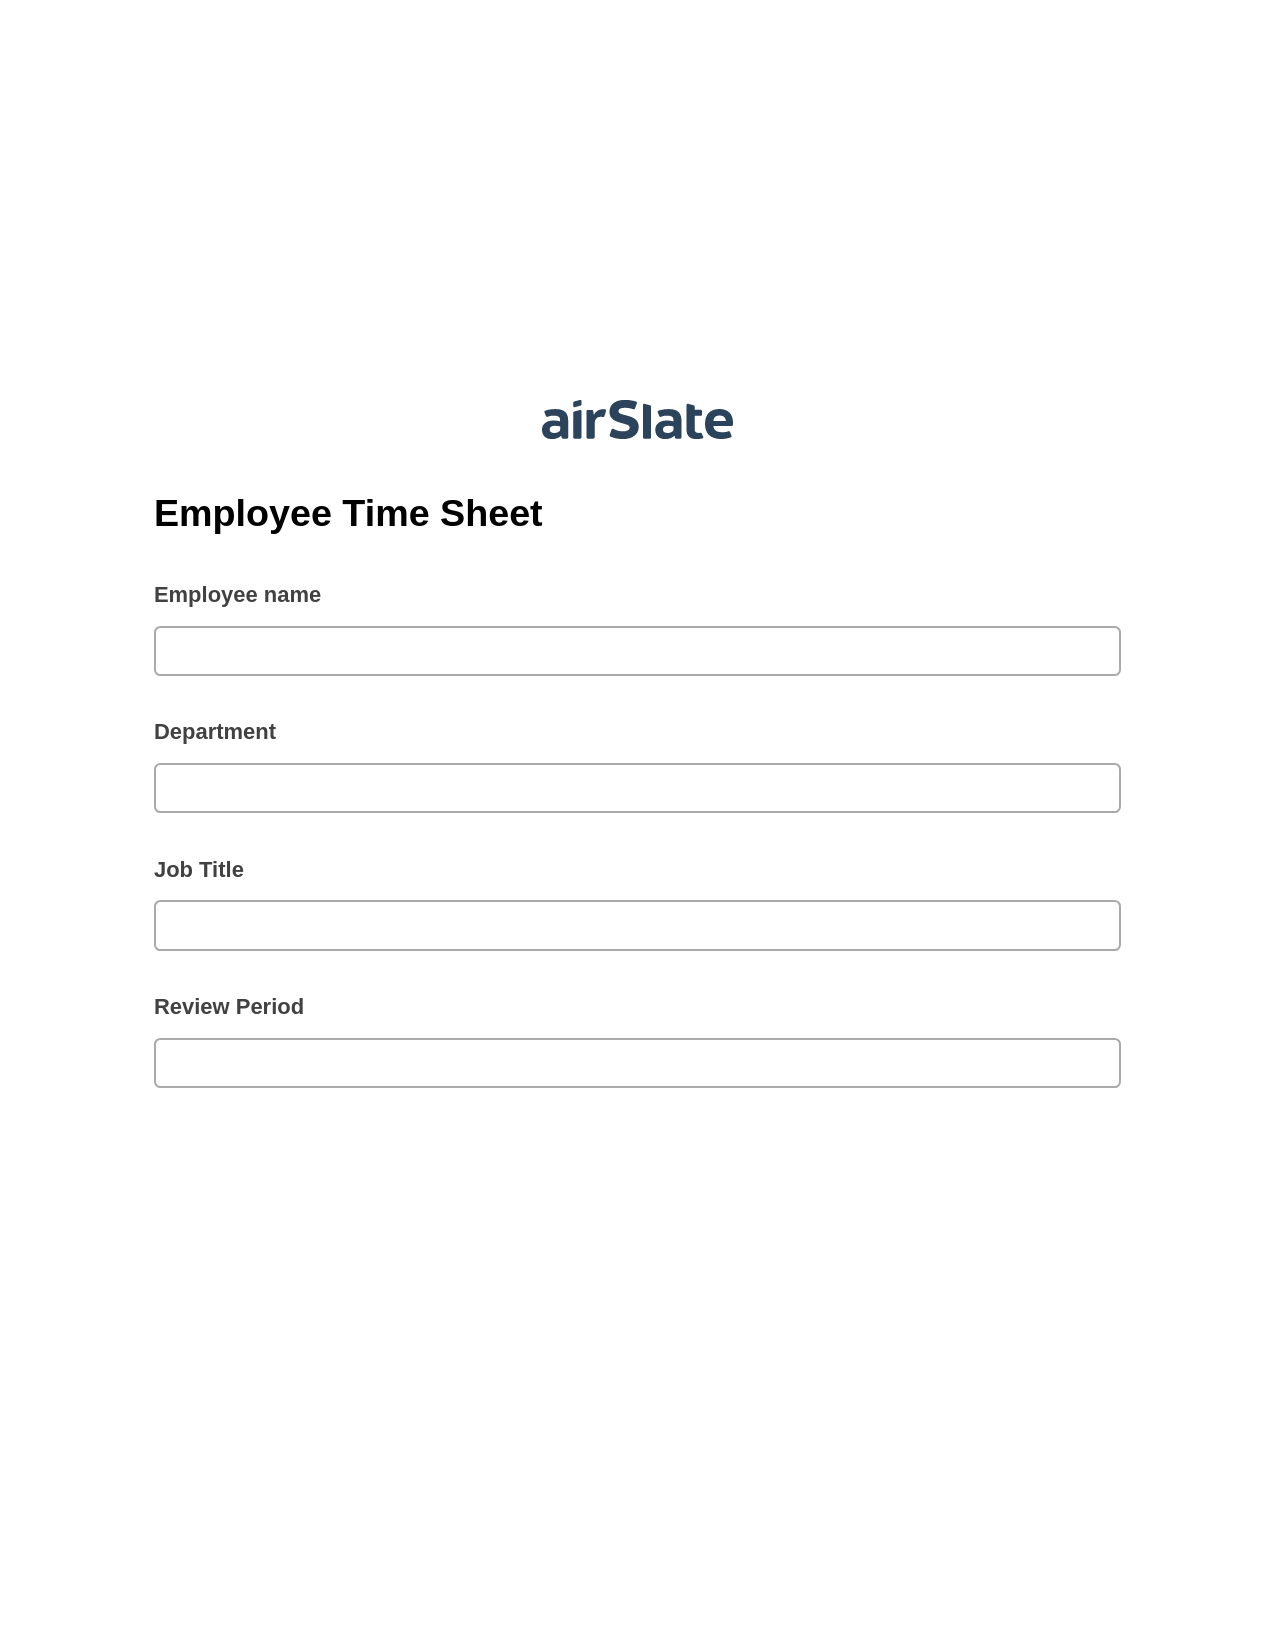 Employee Time Sheet Prefill from NetSuite records, Update Audit Trail Bot, Post-finish Document Bot